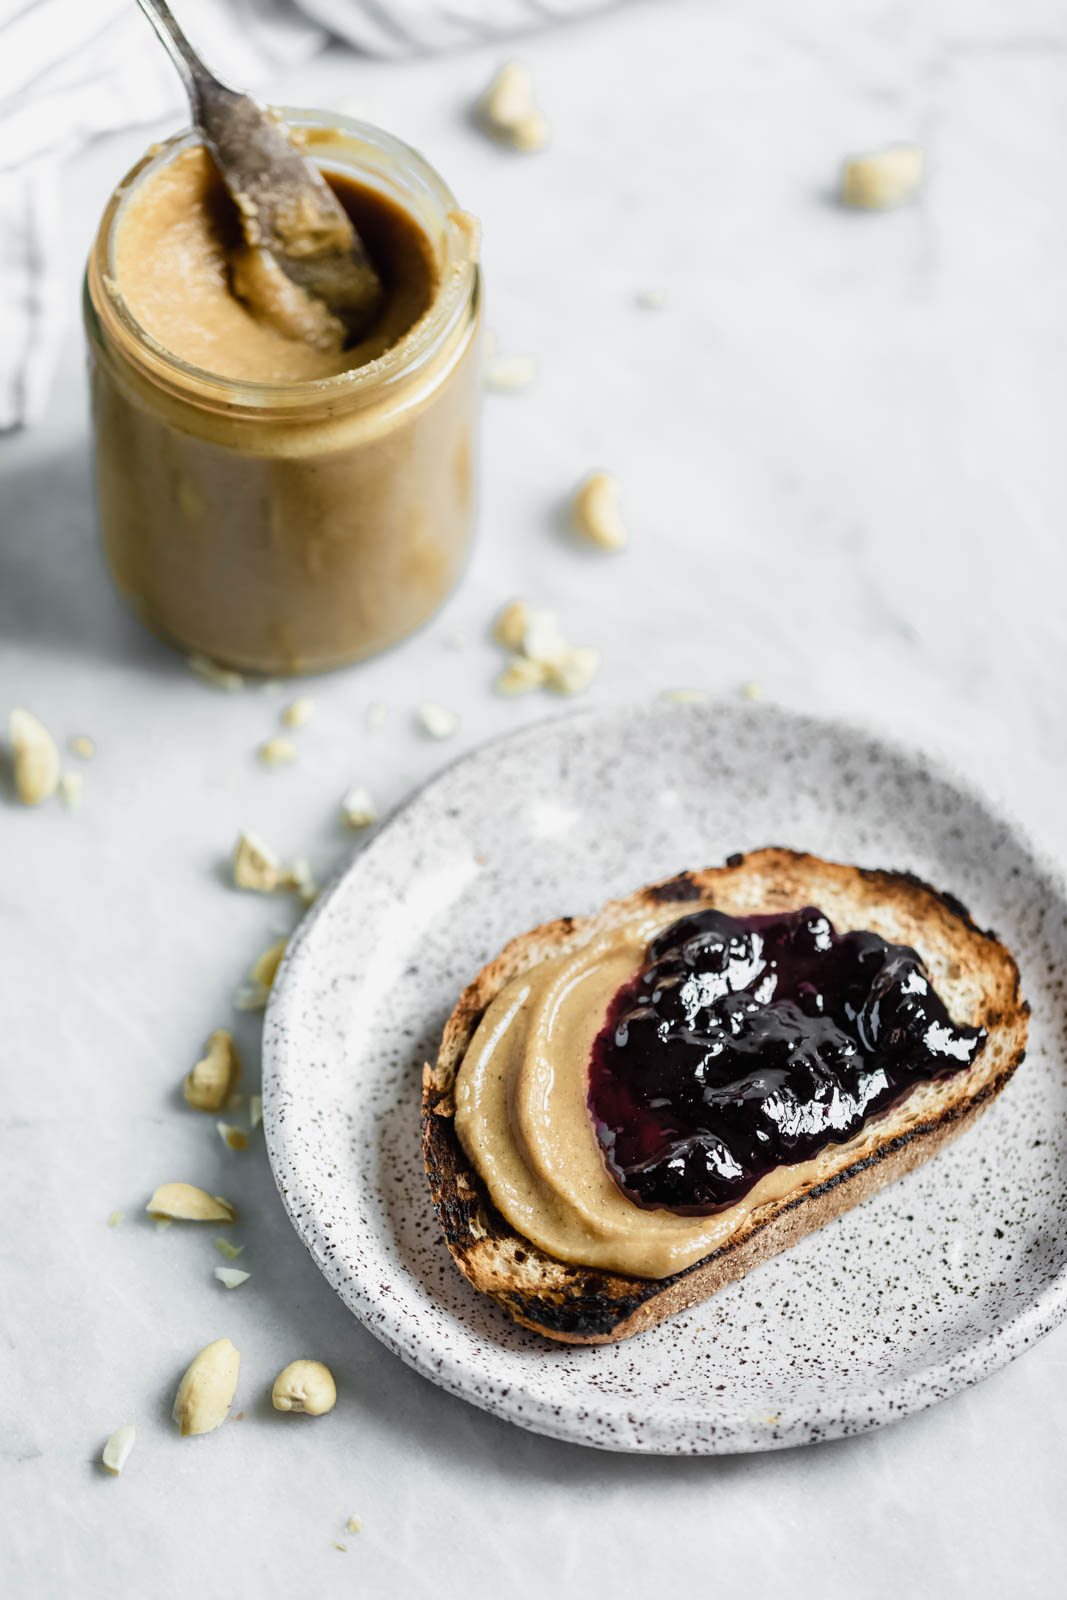 Vanilla Cardamom Cashew Butter on bread with jelly